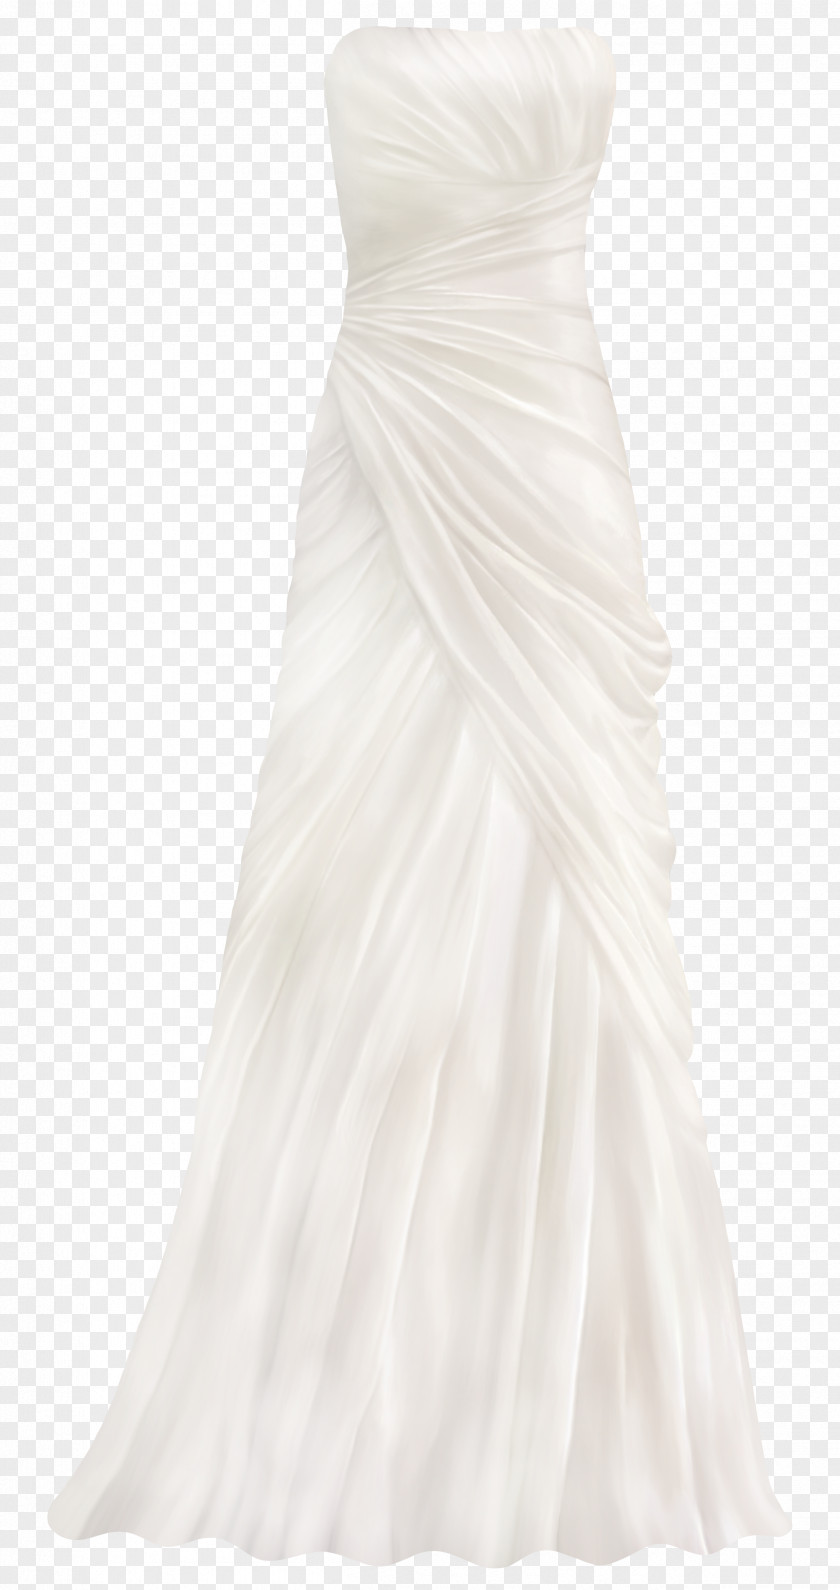 Dress Wedding Clothing Gown Bridesmaid PNG